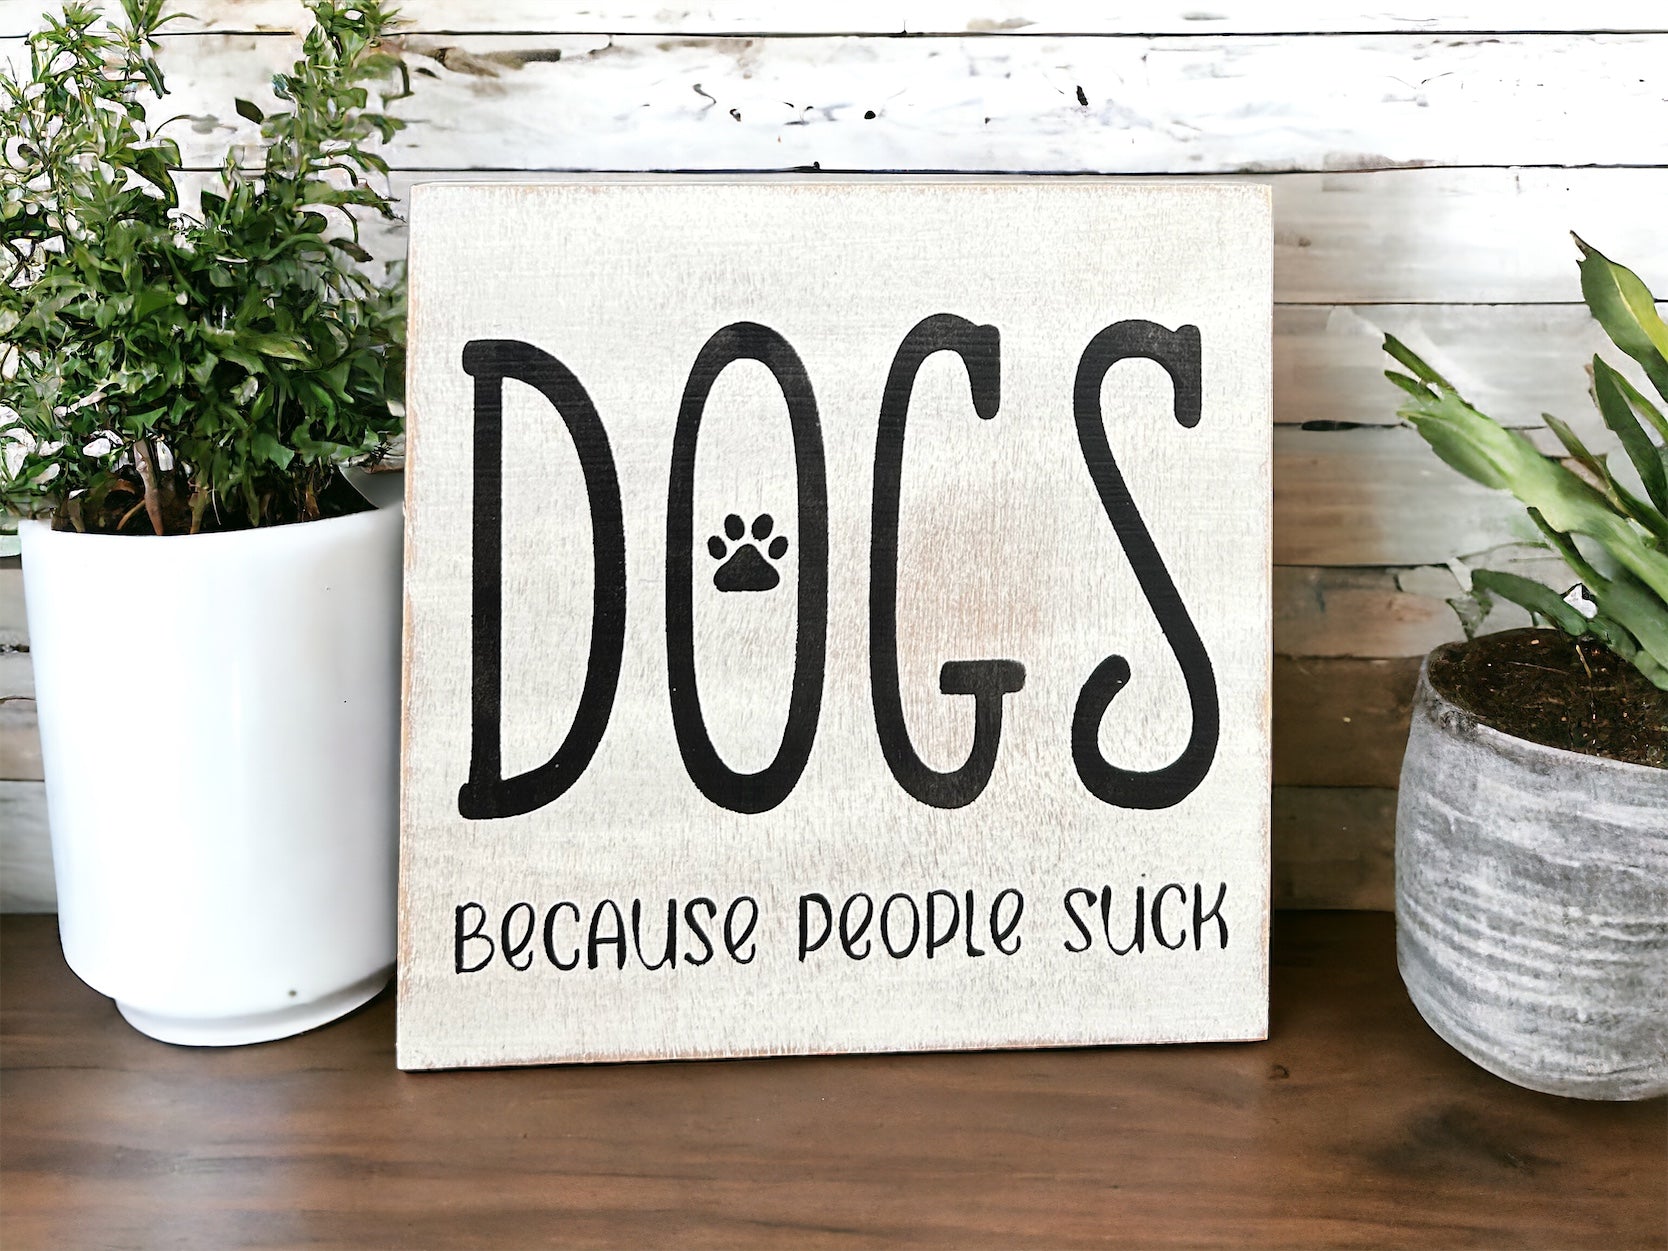 "Dogs because people suck" wood sign